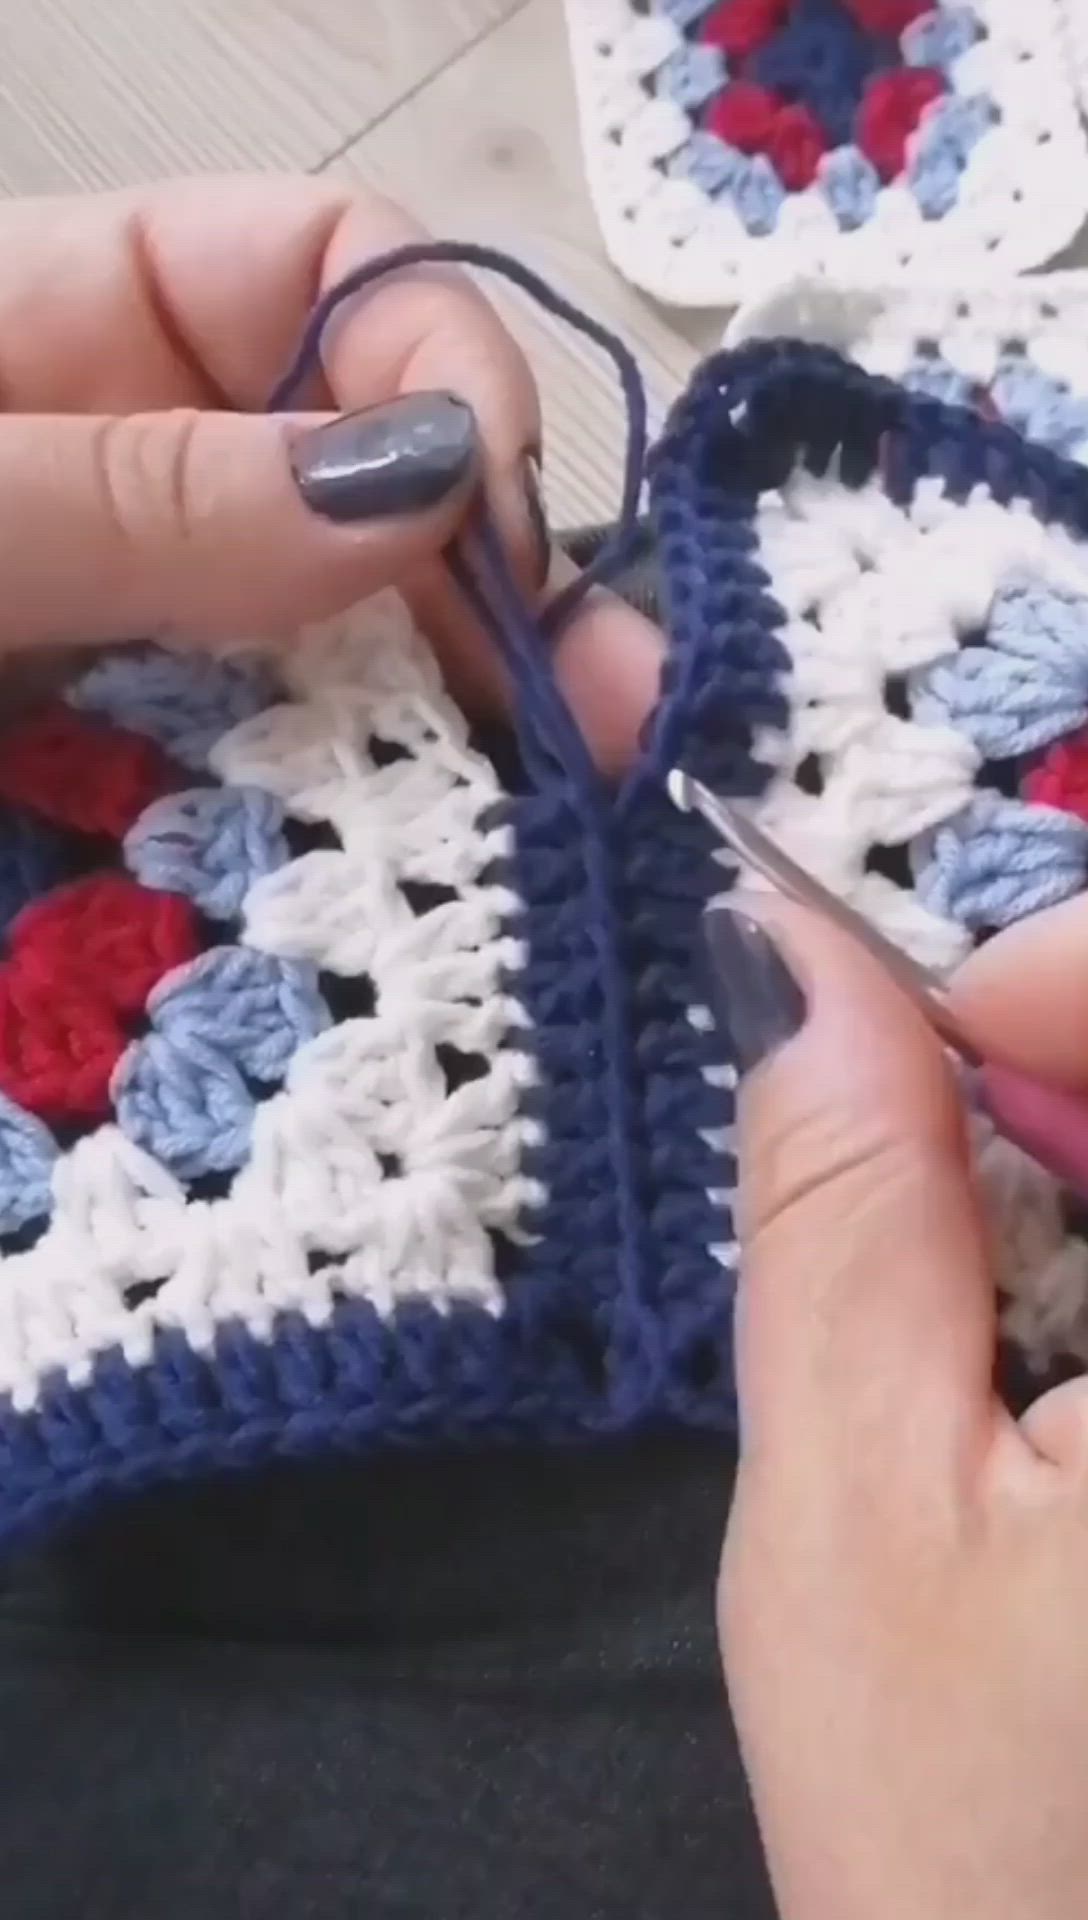 This may contain: someone is crocheting together with scissors and yarn